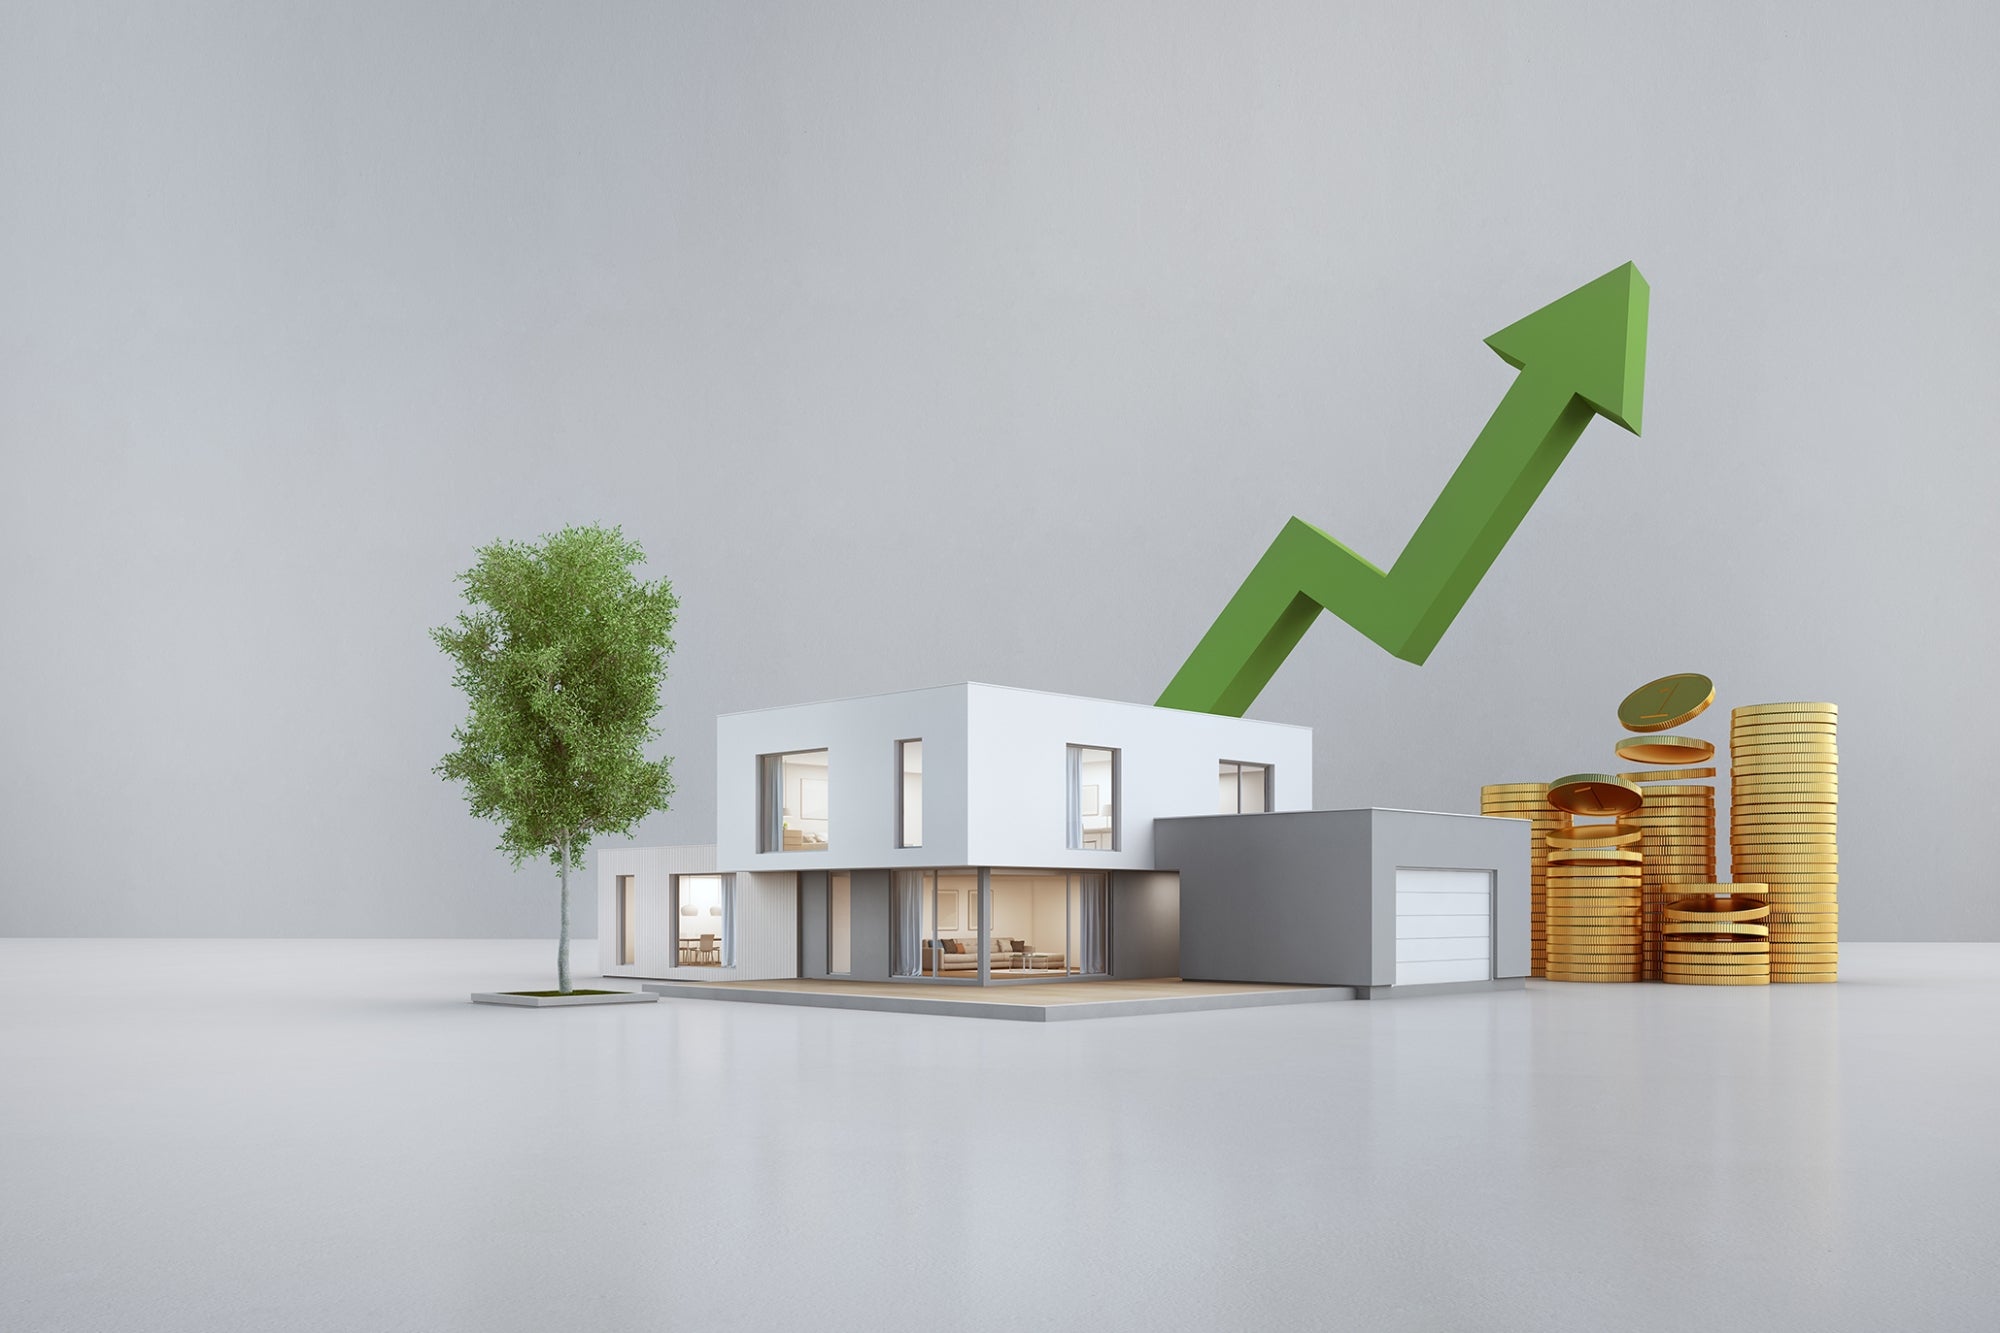 Real Estate Finance Essentials: Managing Investments Wisely